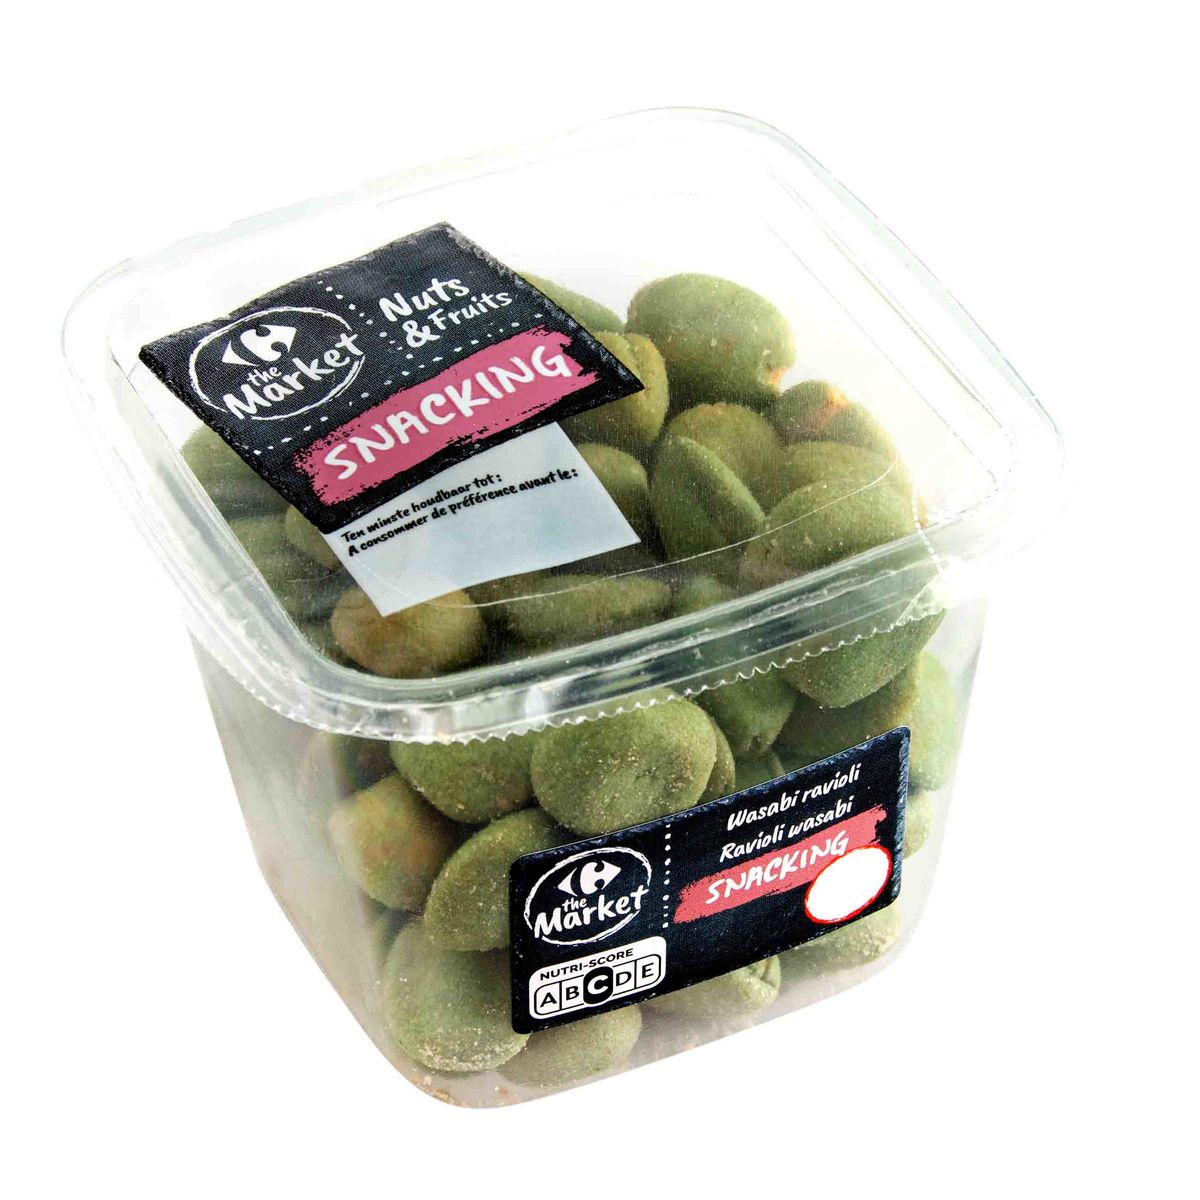 Carrefour The Market Nuts & Fruits Ravioli Wasabi Snacking 160 g